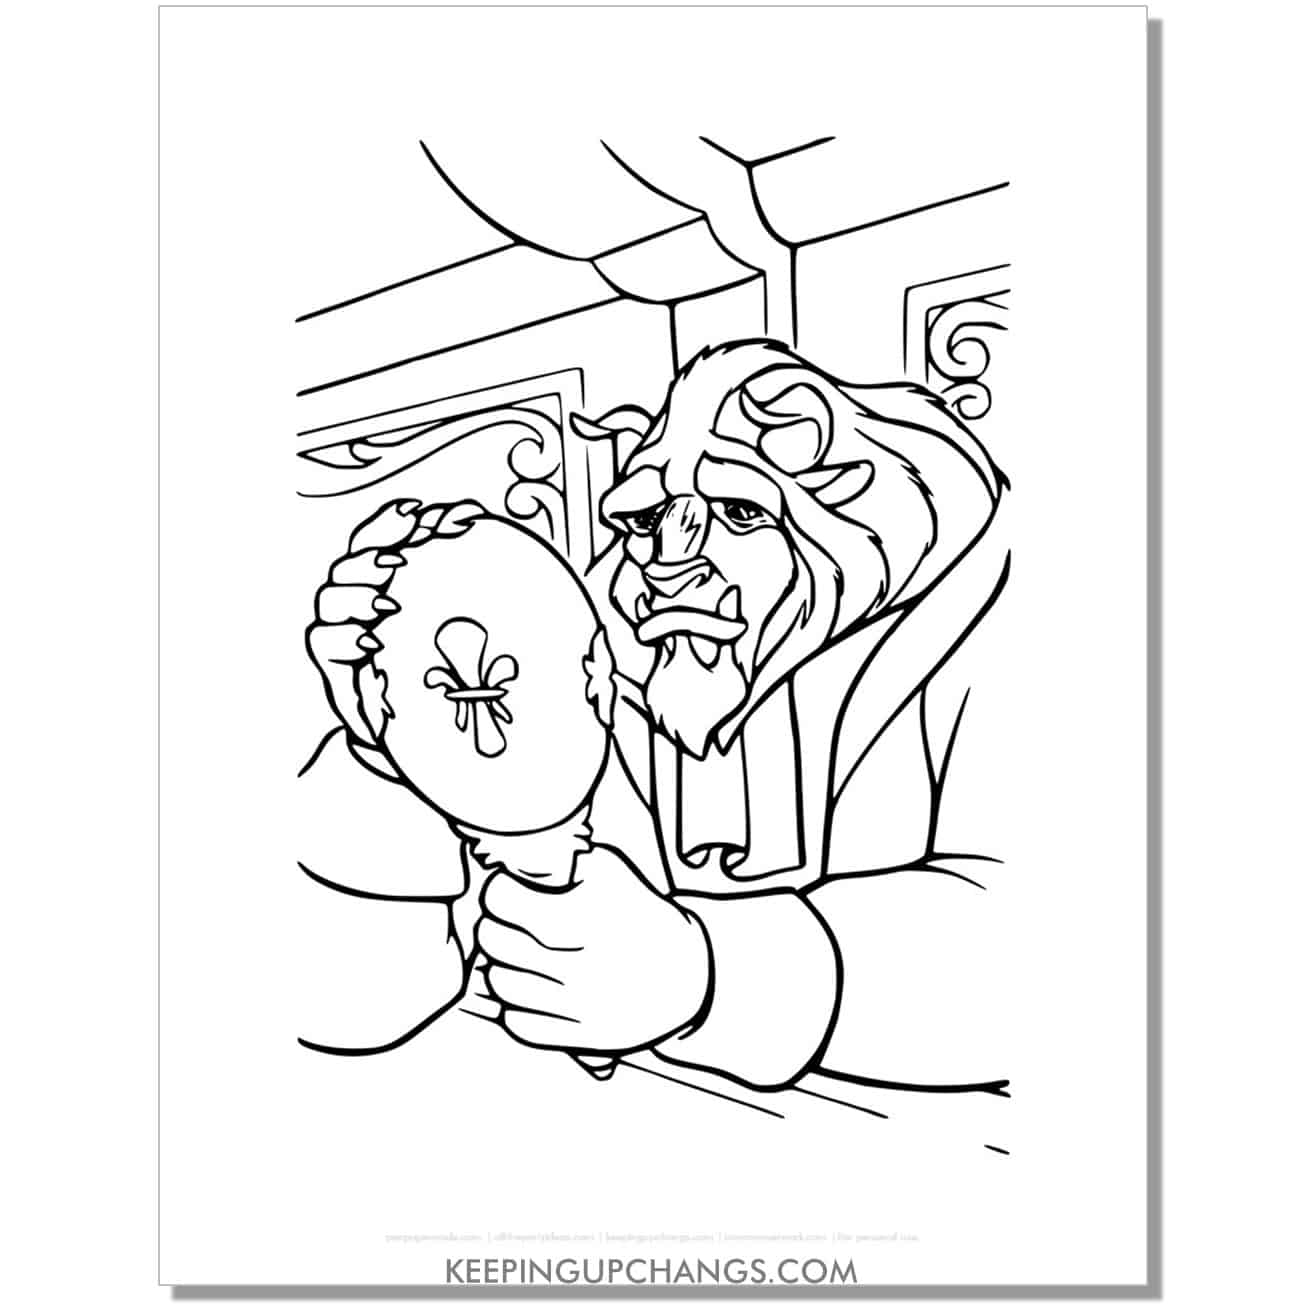 beast looking in enchanted mirror coloring page, sheet.